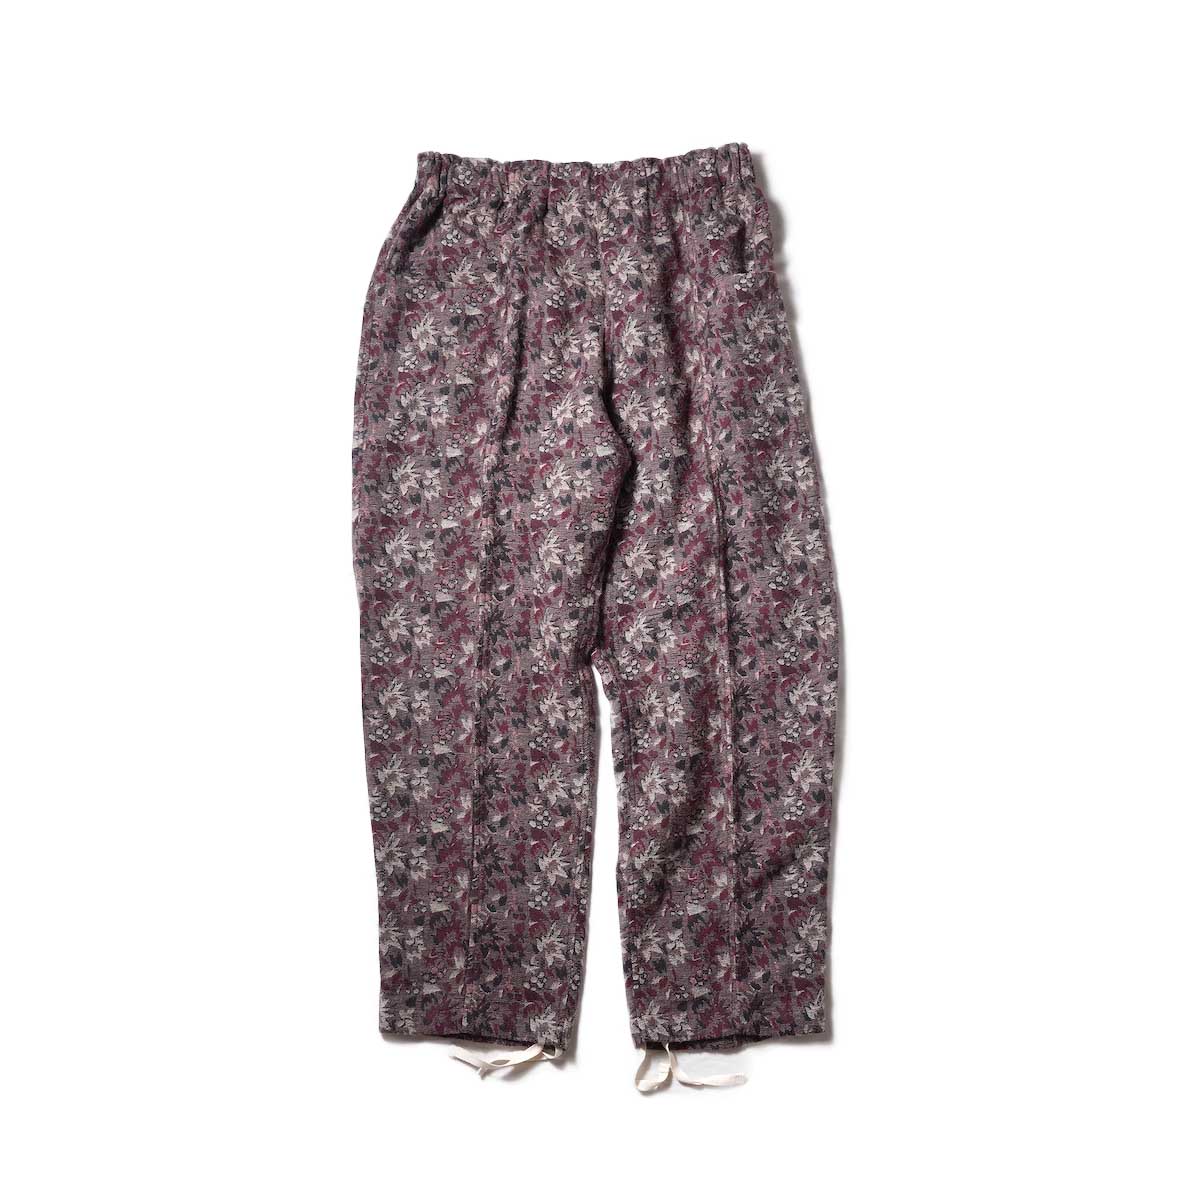 South2 West8 / ARMY STRING PANT - India Jacquard (Leaf)